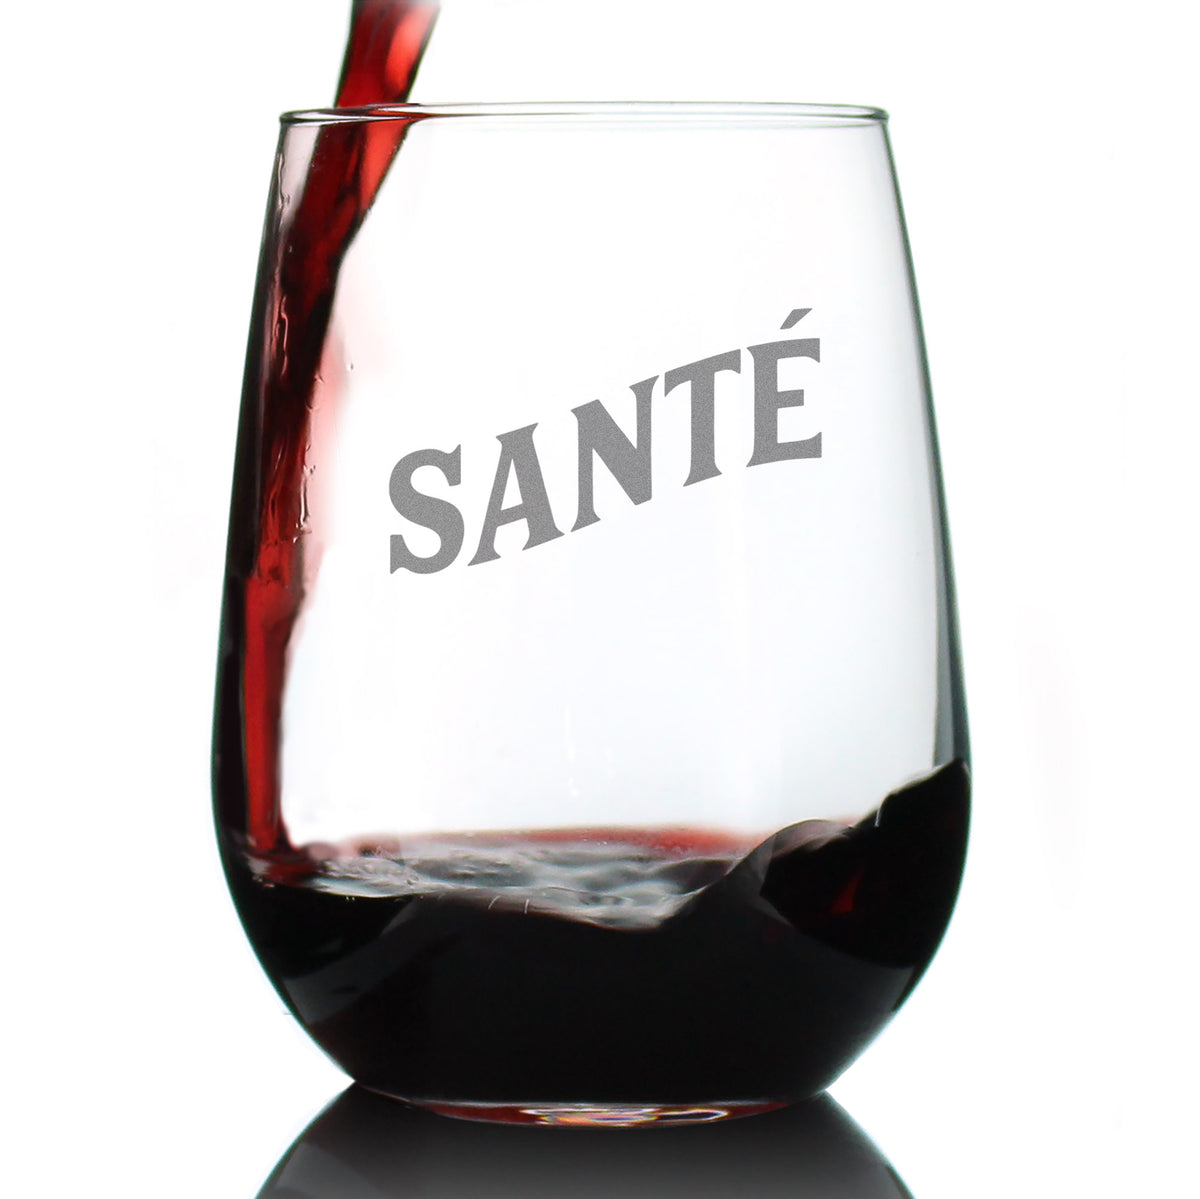 Sante - French Cheers - Stemless Wine Glass - Cute France Themed Gifts or Party Decor for Women and Men - Large